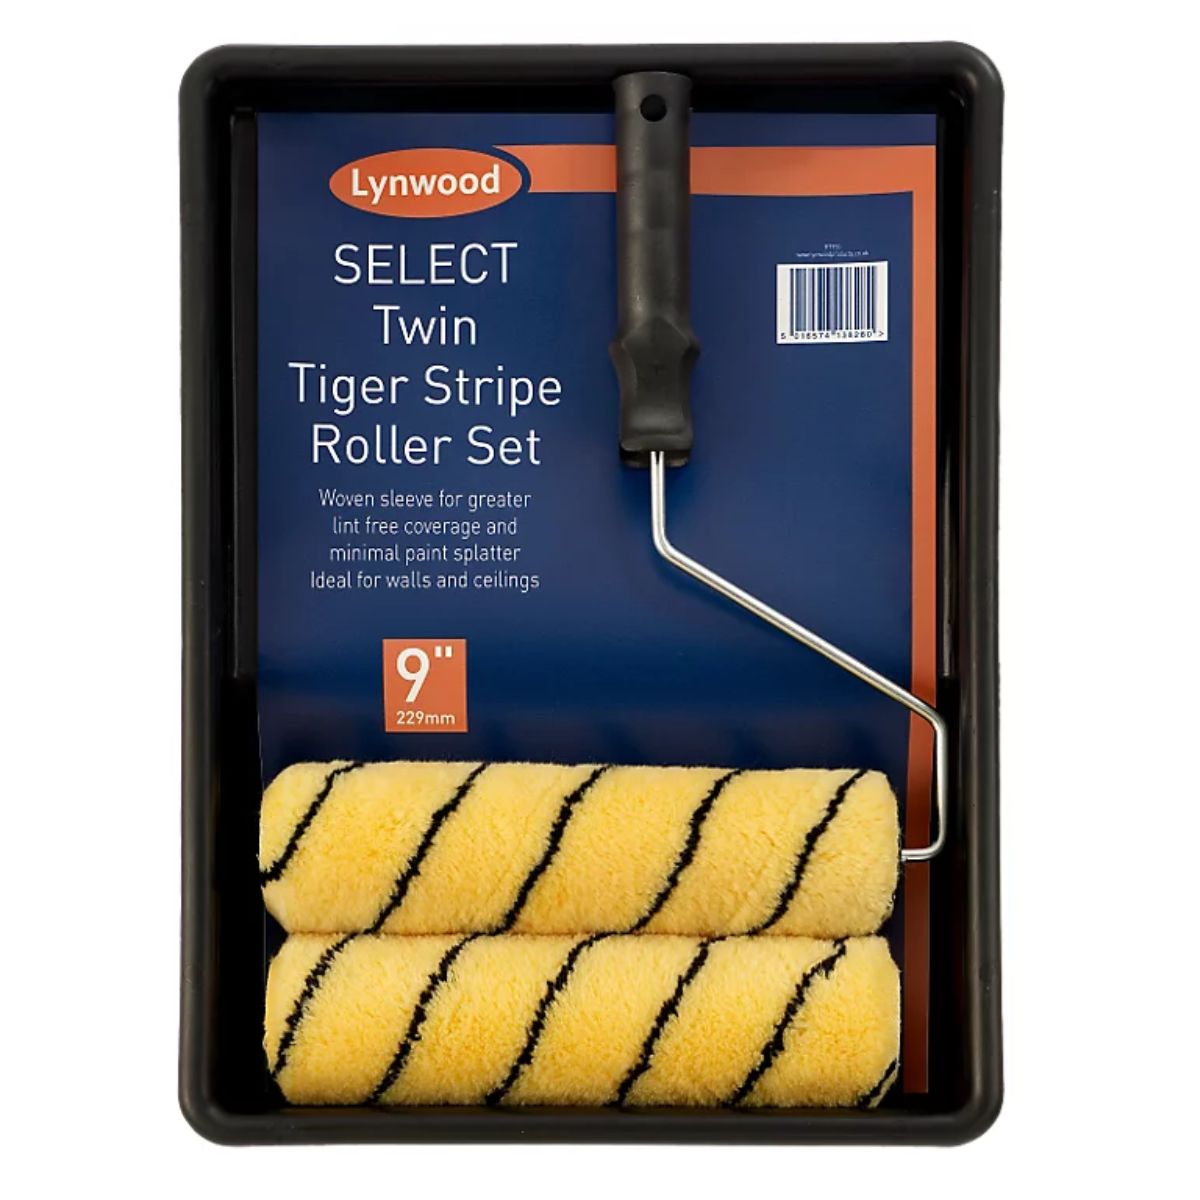 Paint roller and tray set with Lynwood - Twin Pack Select Tiger Stripe rollers.